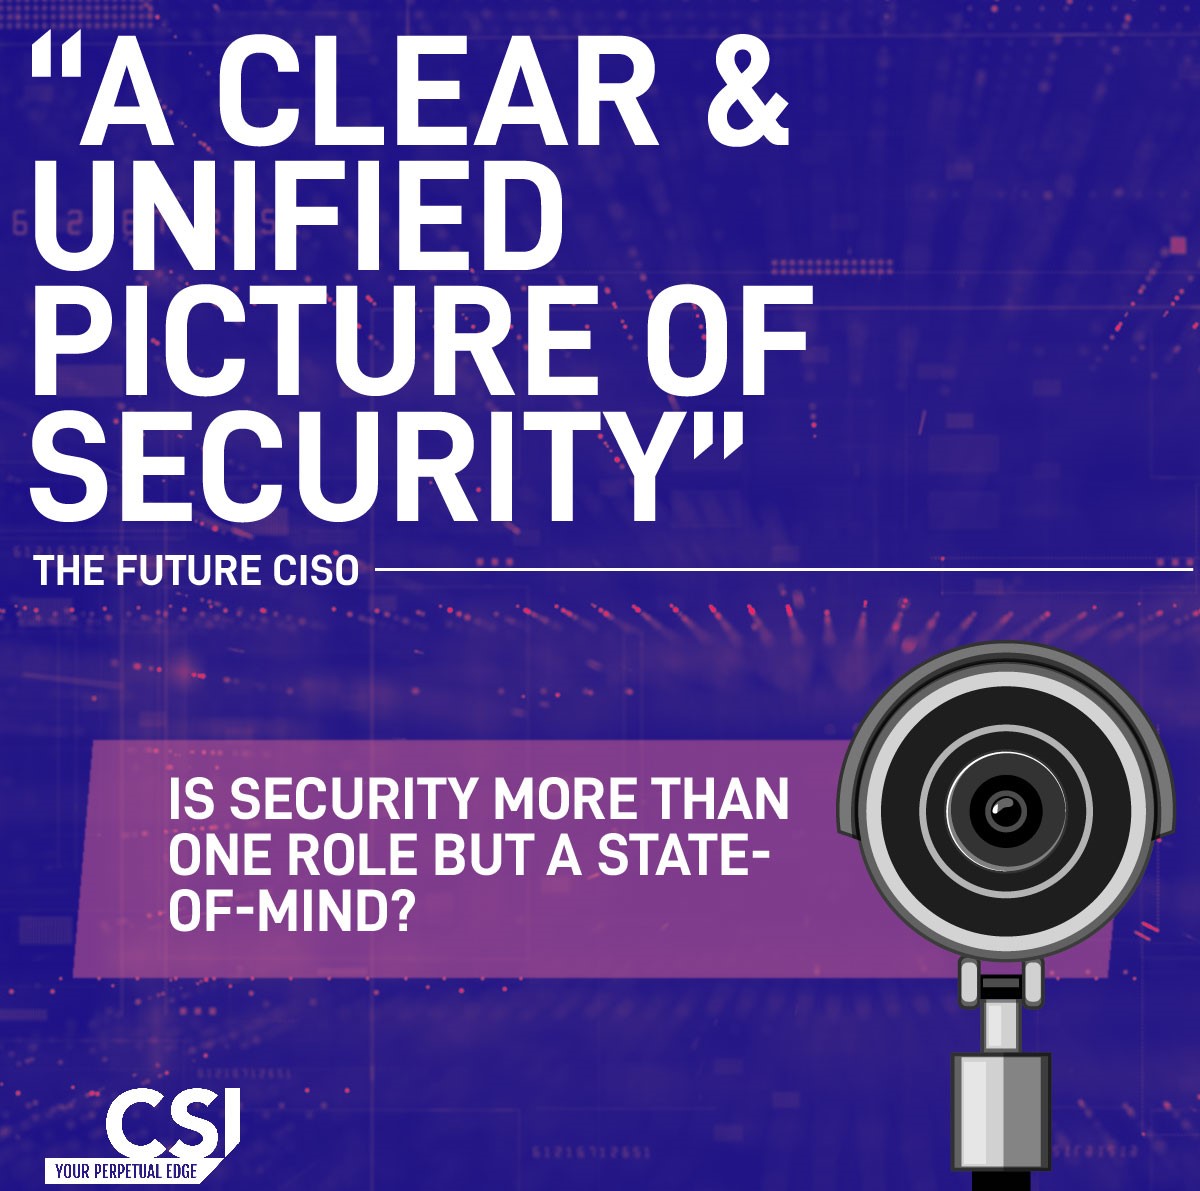 The CISO brings security together. 